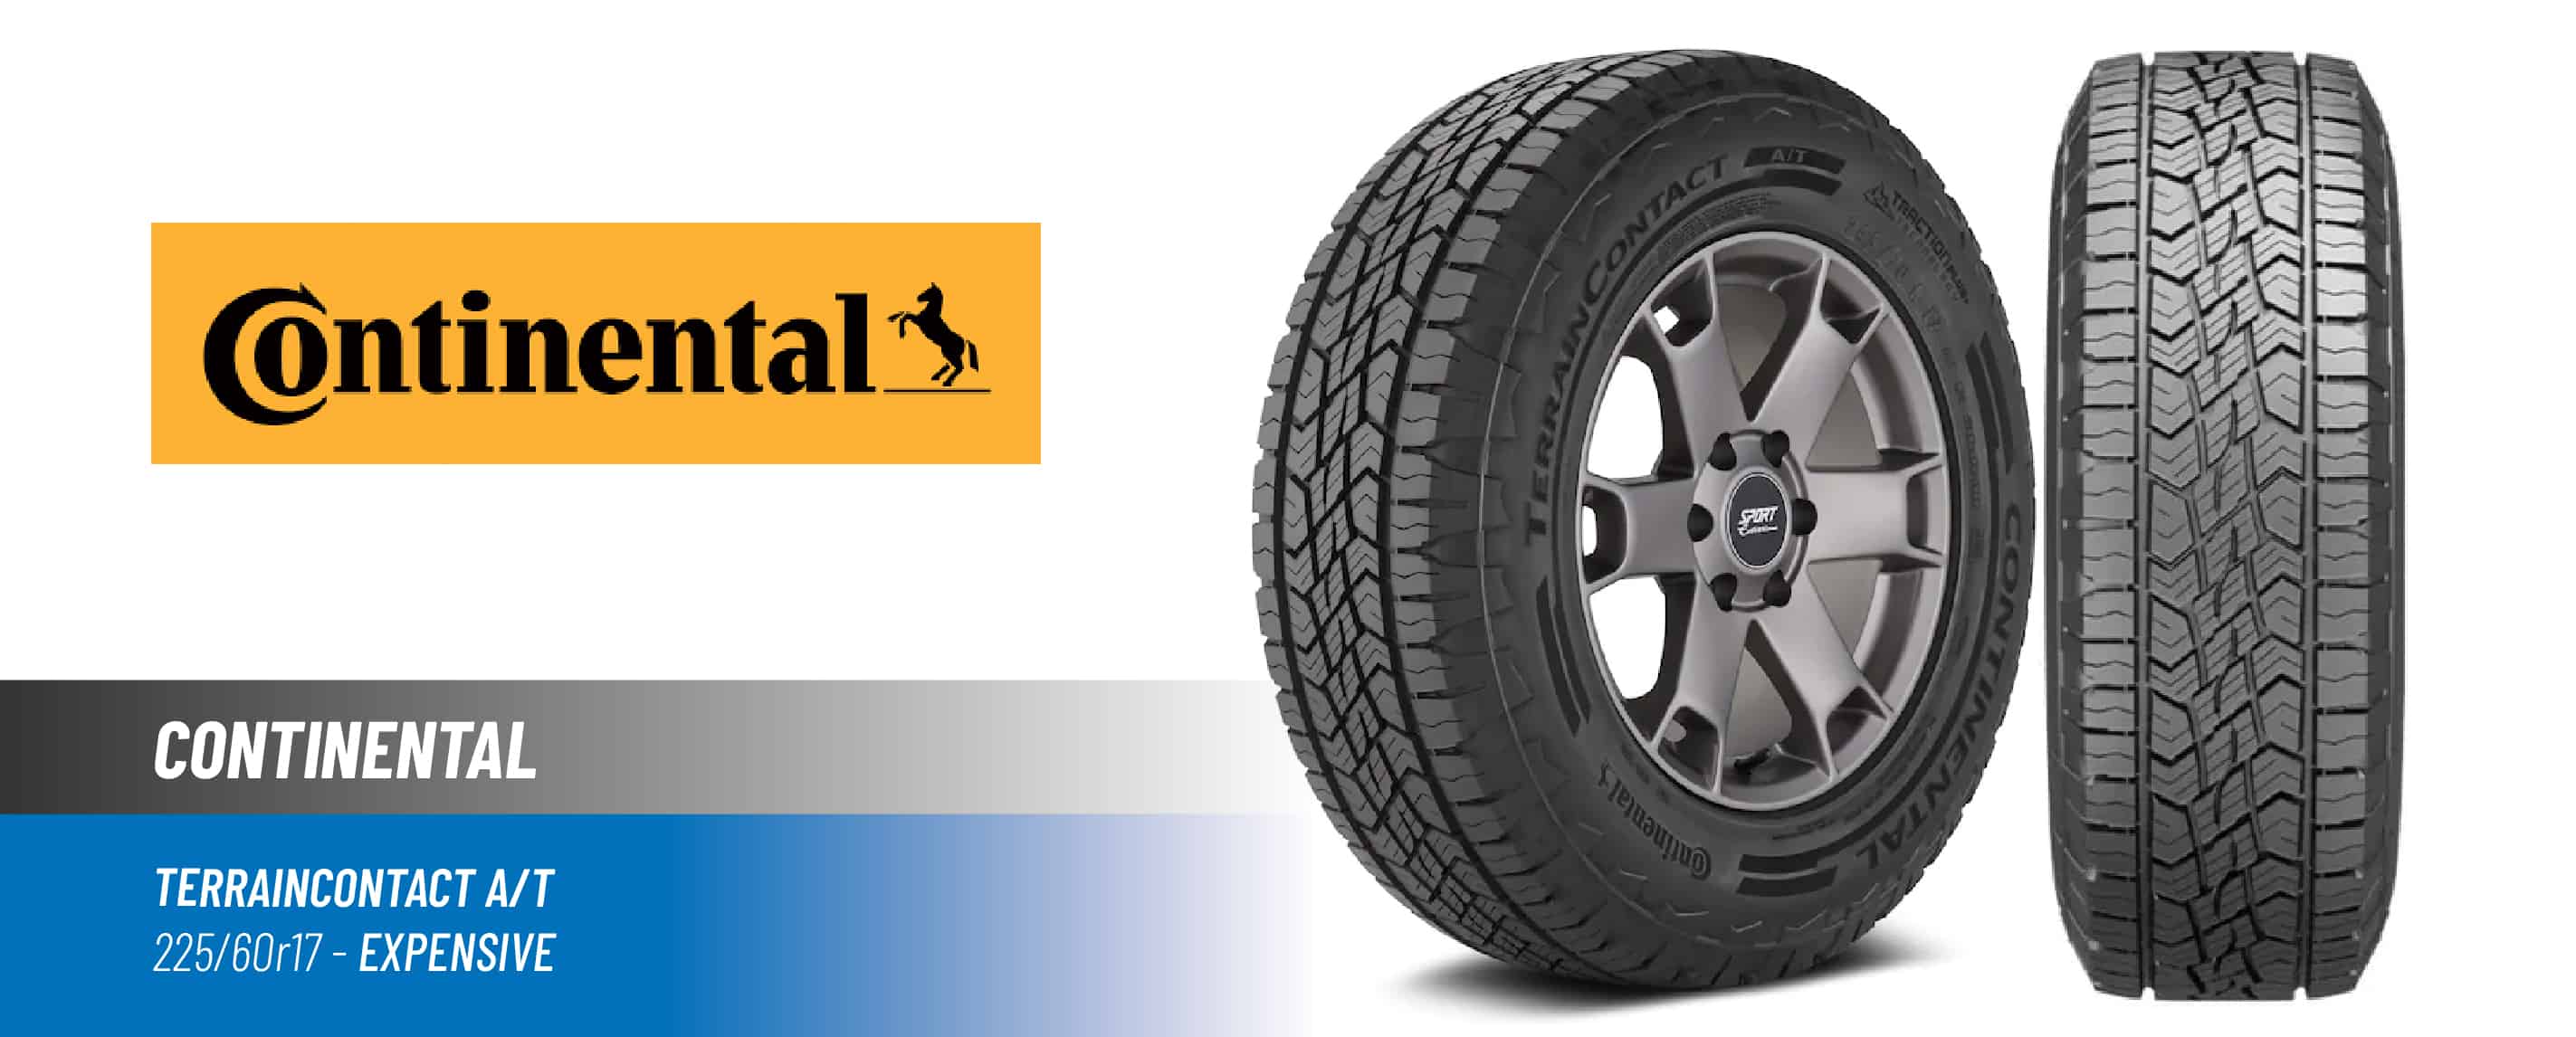 Top#4 Most Expensive: Continental TerrainContact A/T – 225/60 R17